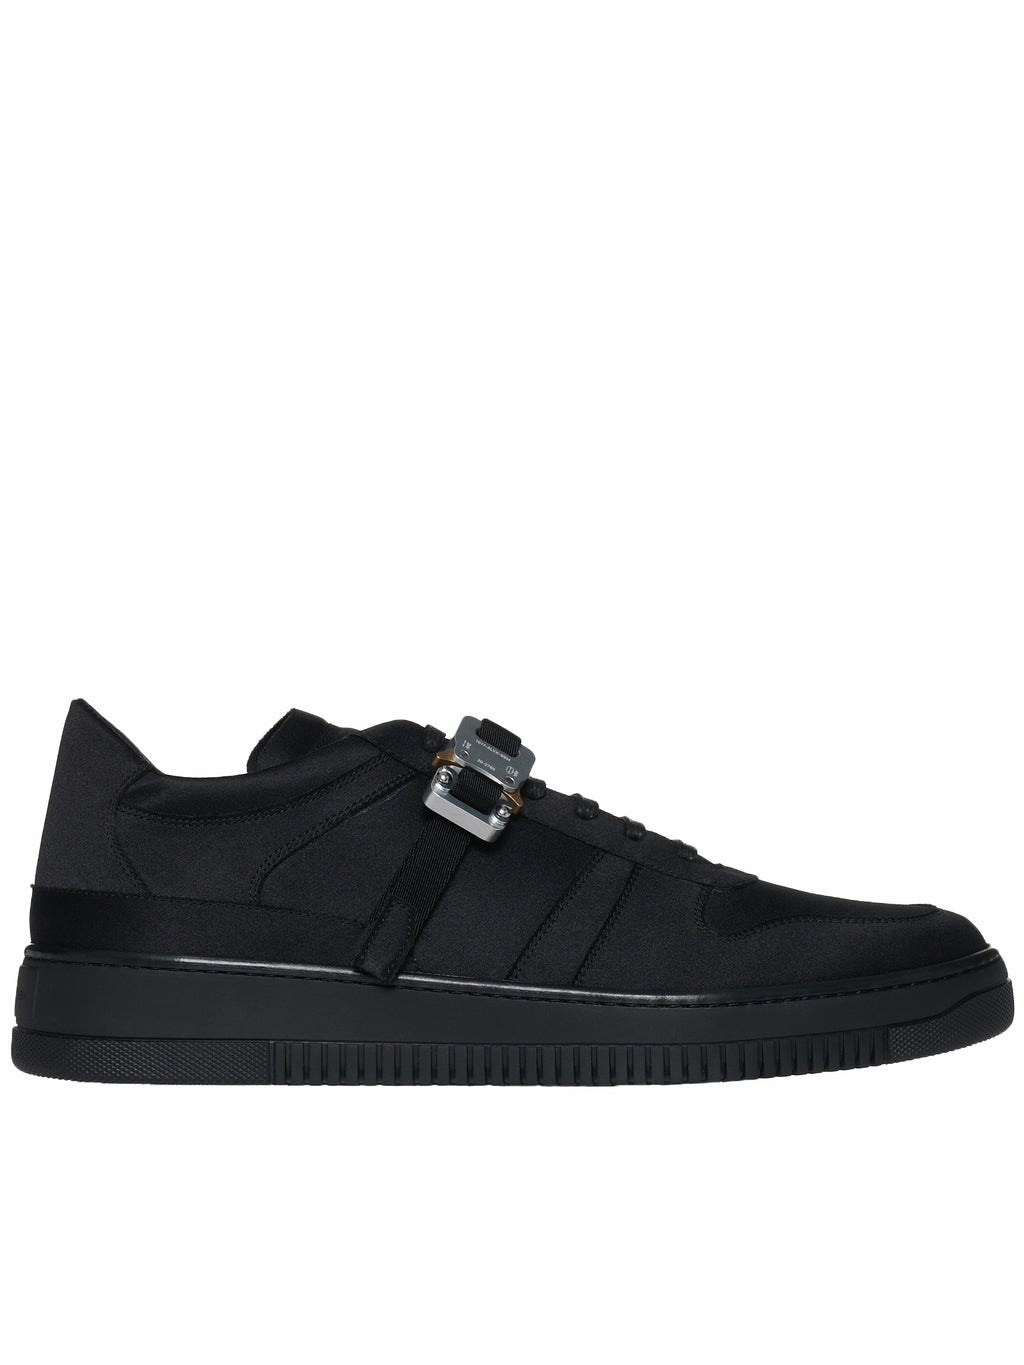 Only 45.00 usd for LENNOX BLACK LEATHER - SM REBOOTED Online at the Shop